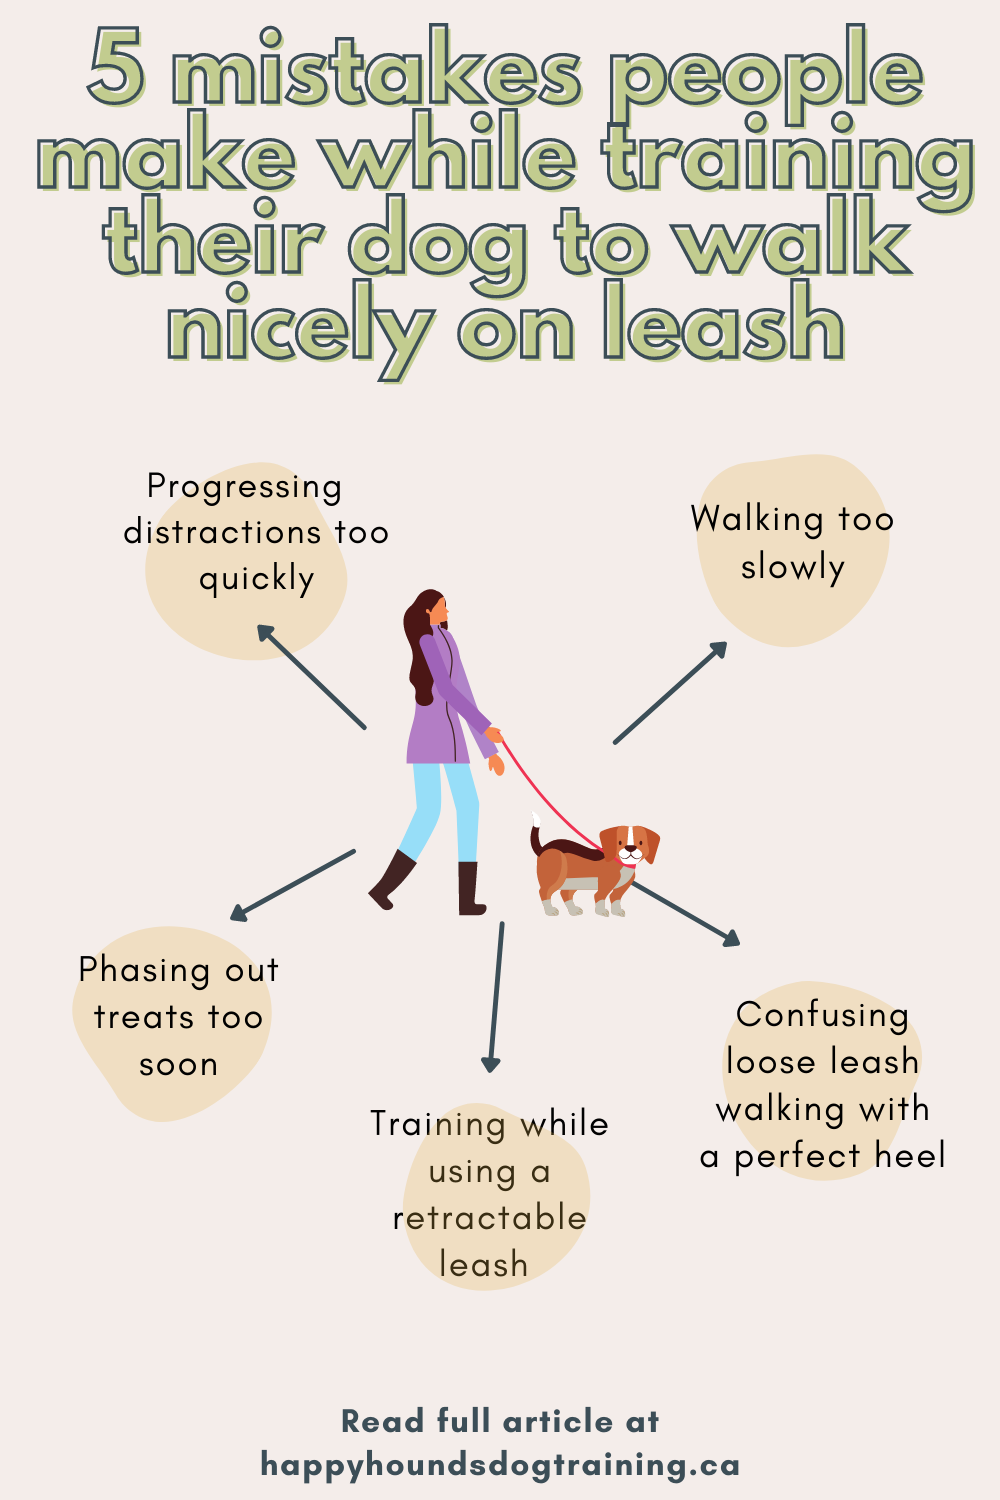 5 common mistakes while training loose leash walking